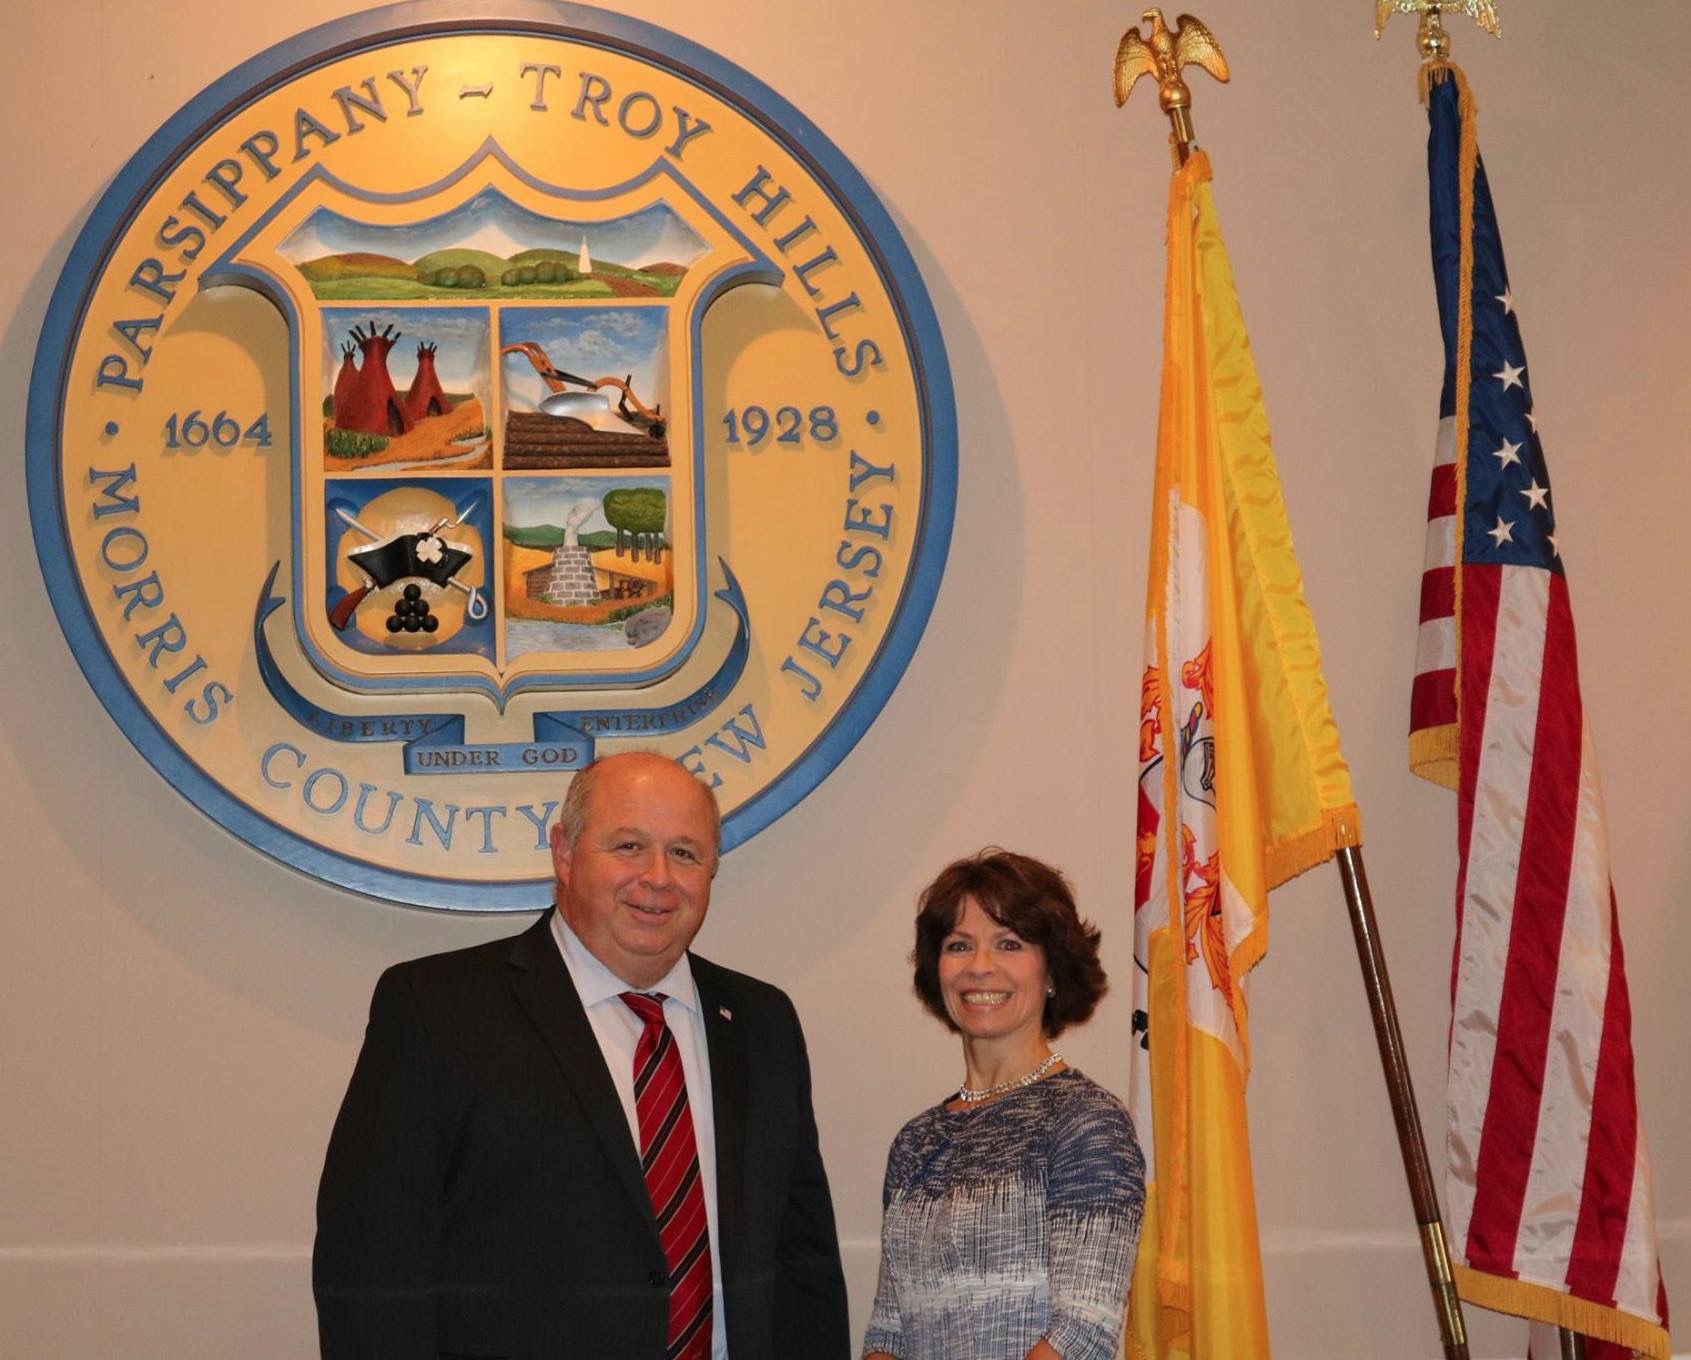 Mayor Barberio Welcomes Superintendent of Schools to Parsippany